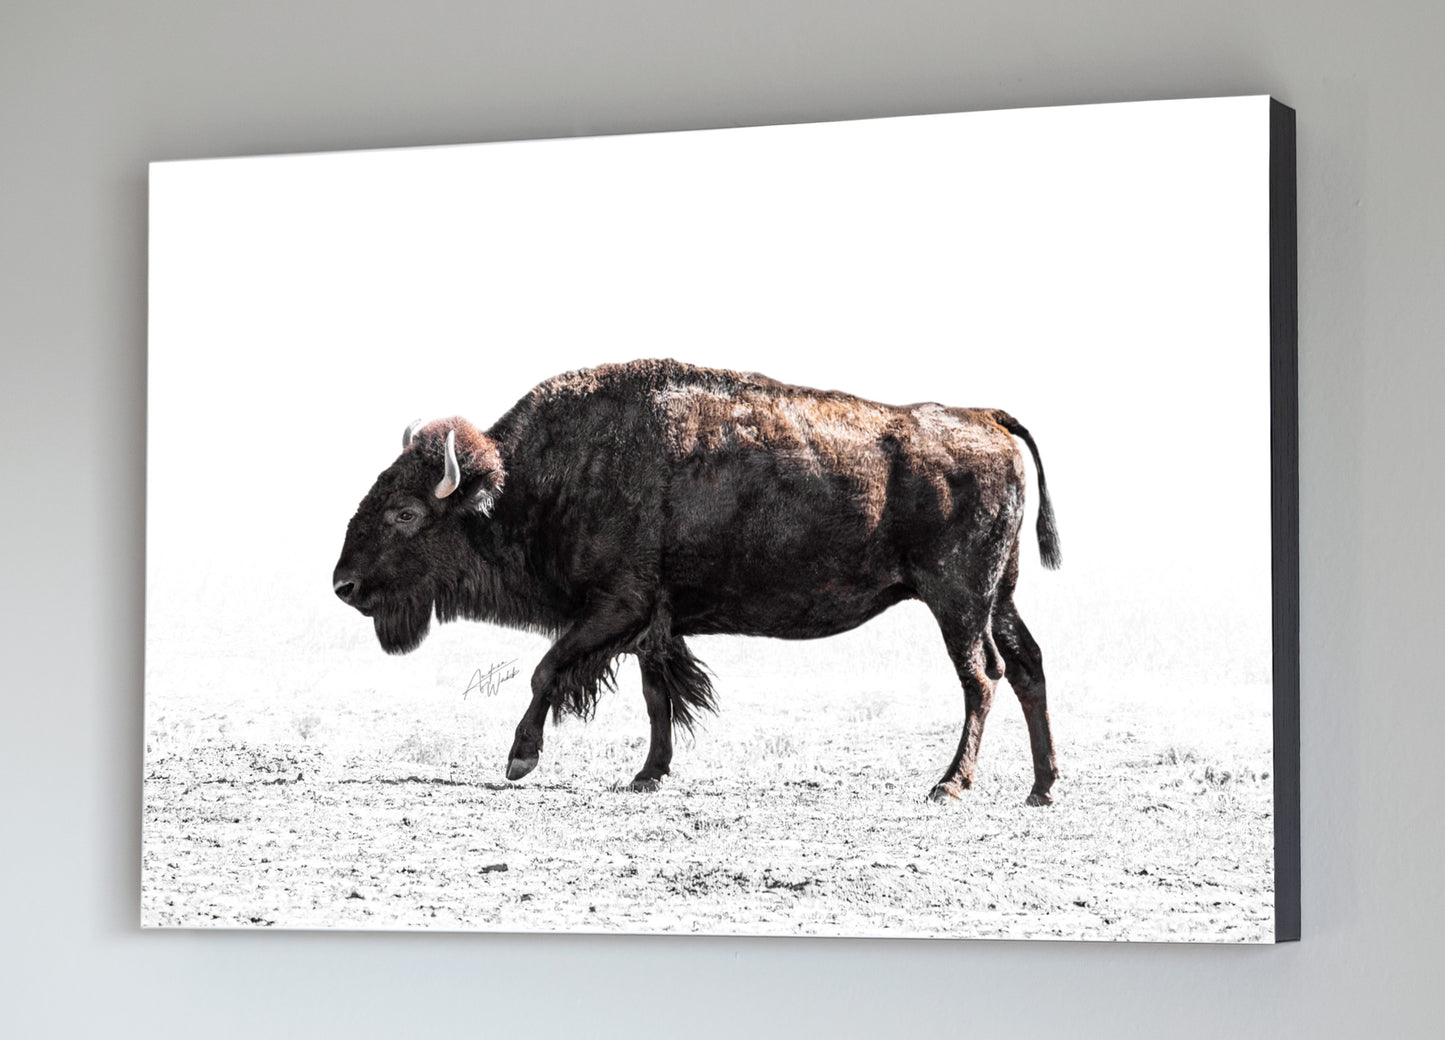 This beautiful American Bison is featured on a white background and is surrounded by grass blade shadows. This makes an interesting portrait for your home, office, or nursery wall decor, whether you're looking for something artistic or simply want something fun to hang around the house. Bison gift. Bison artwork. Bison art. Buffalo art. Buffalo artwork. Buffalo gifts. Bison stationary. Buffalo Stationary. Animal Photography